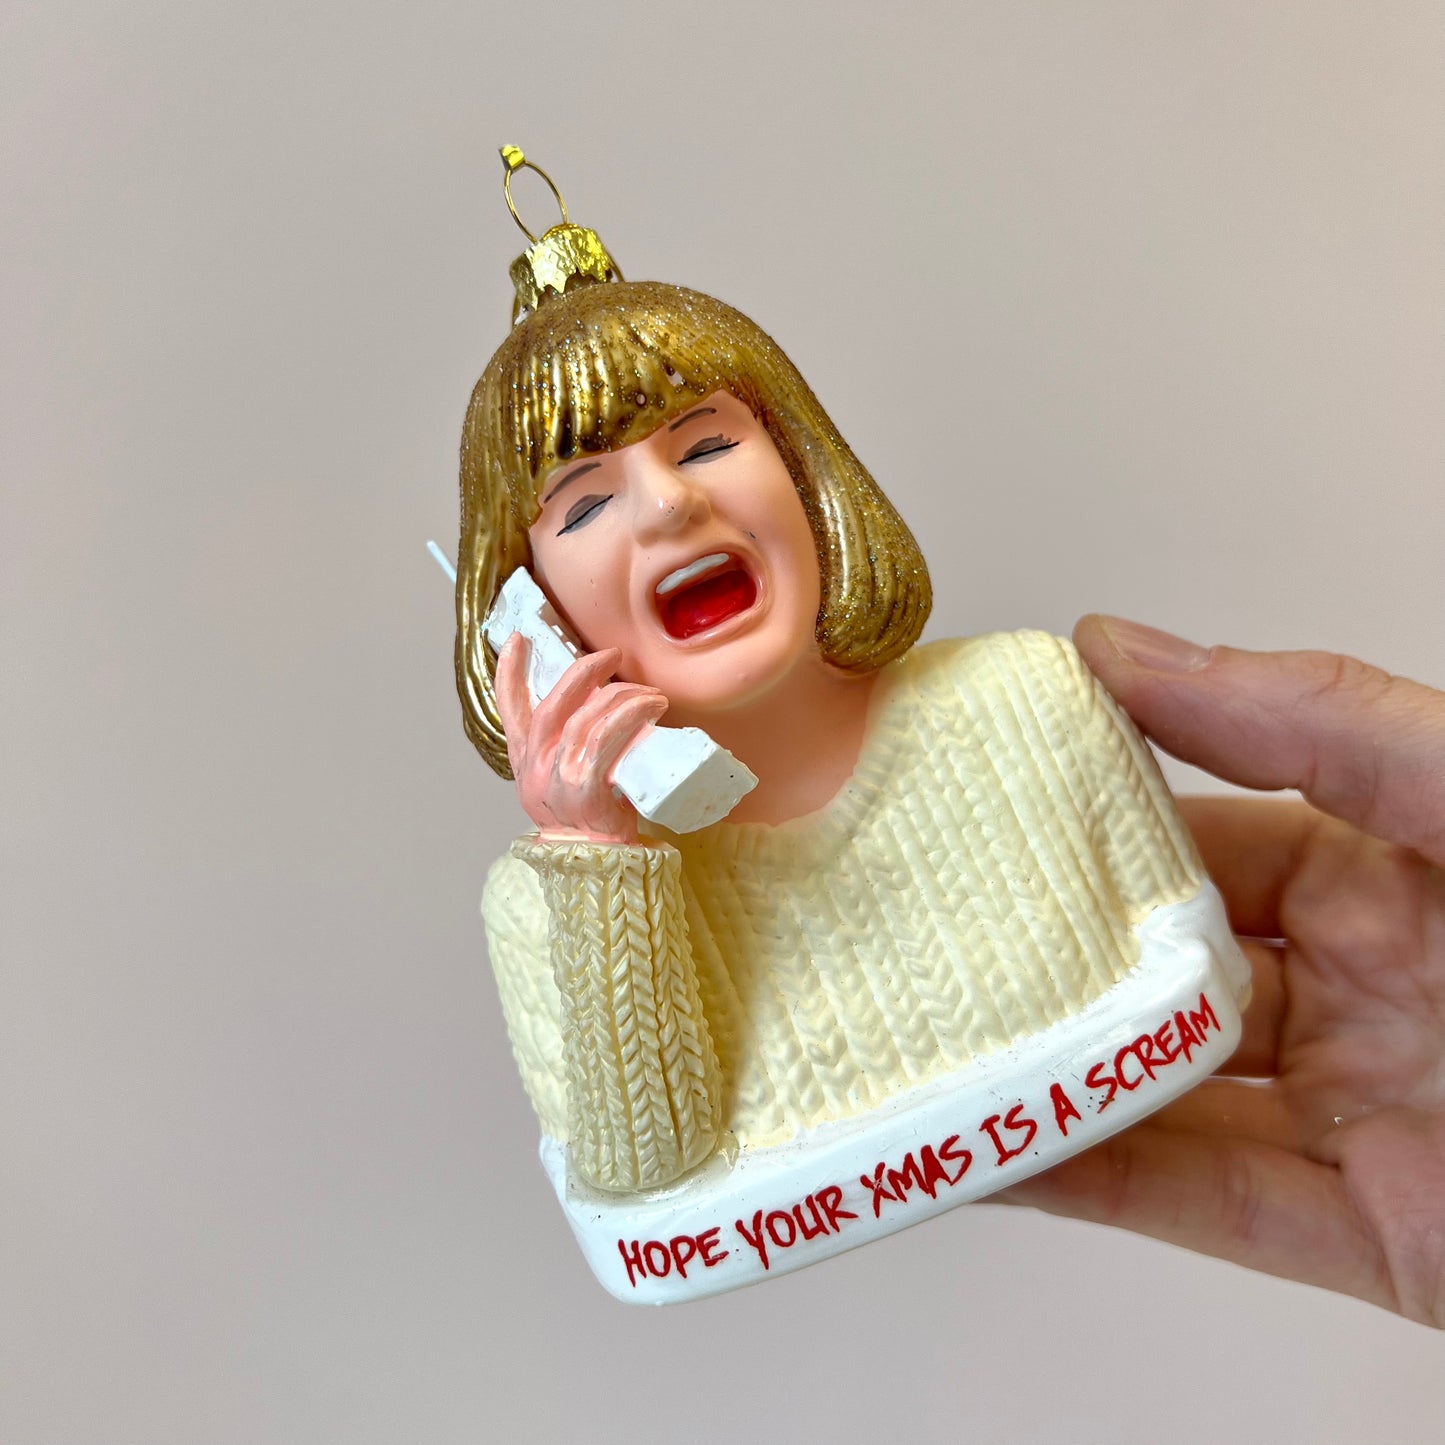 Hope Your Xmas is a Scream Ornament